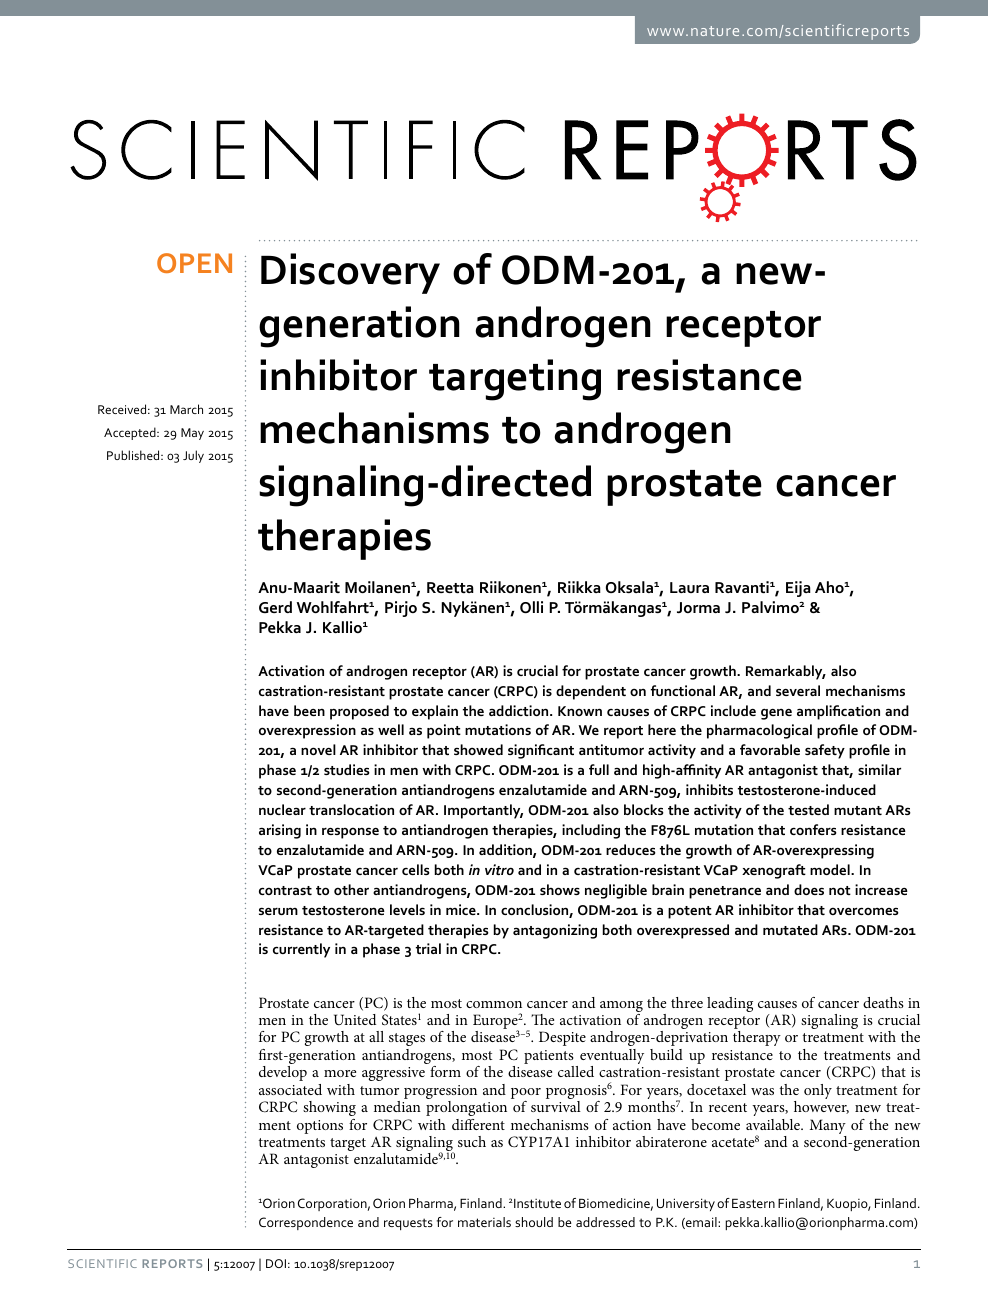 Discovery of ODM-201, a new-generation androgen receptor 